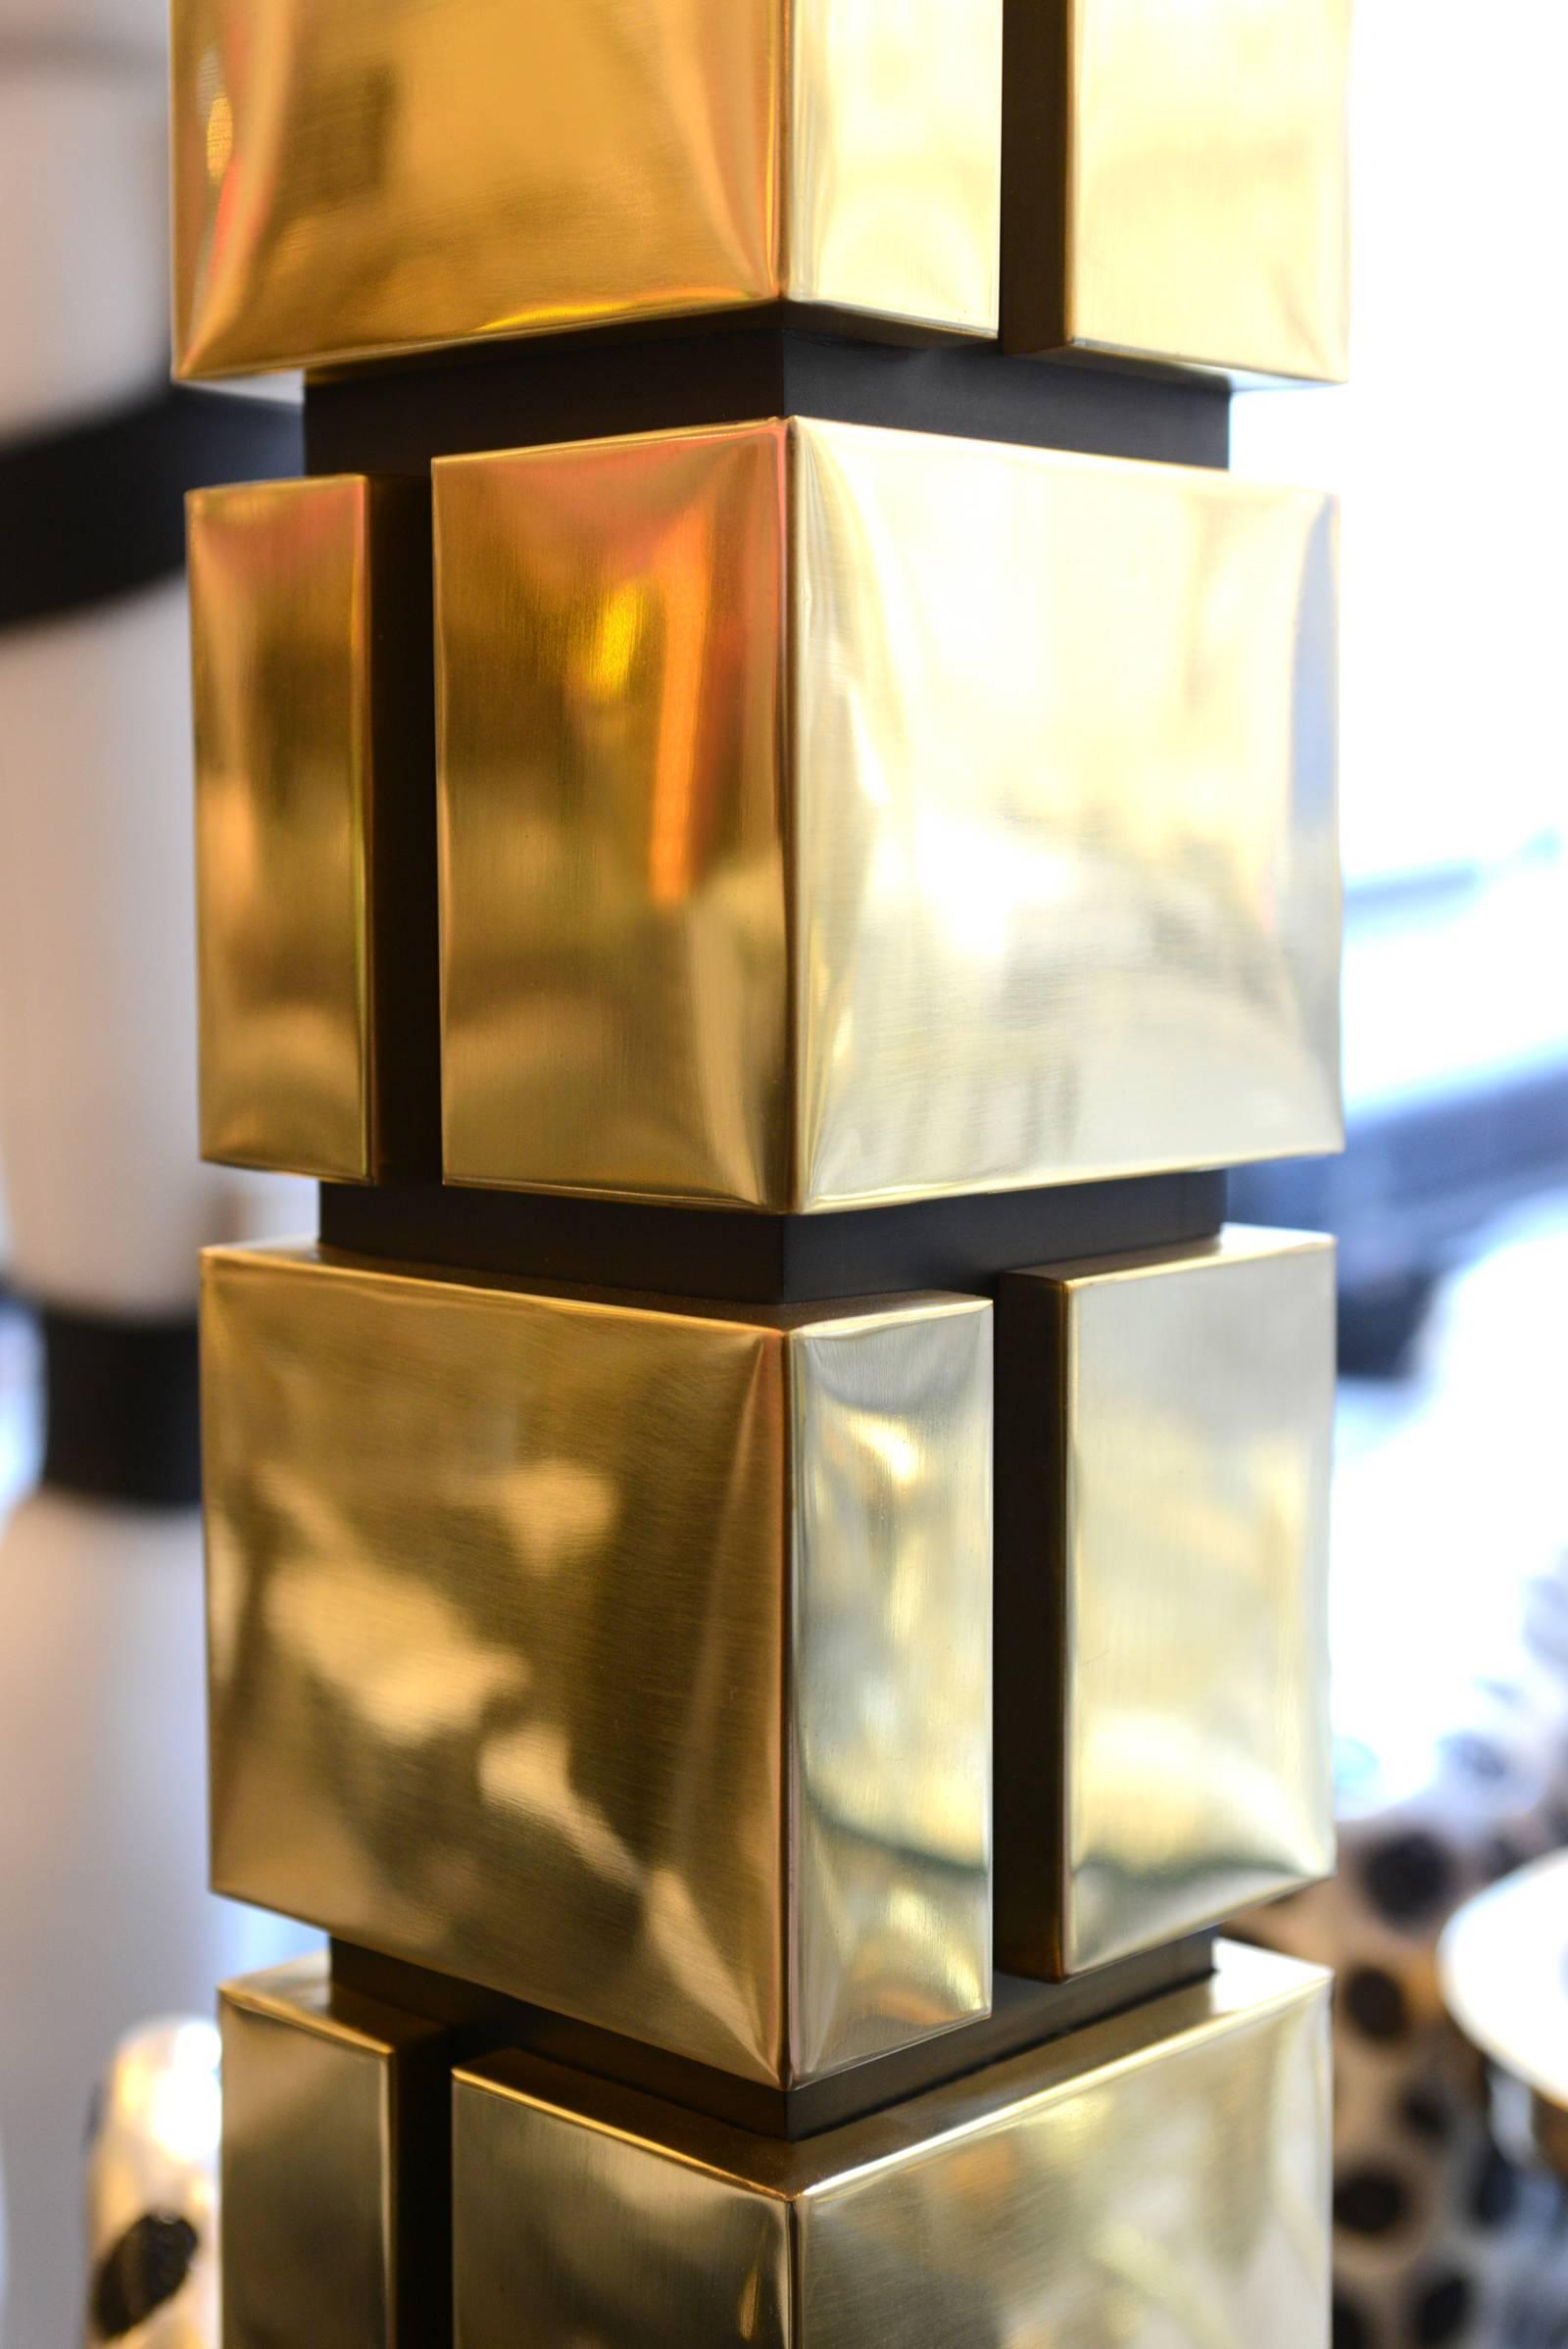 Floor lamp Raid for office or living room,
in polished brass finish.
